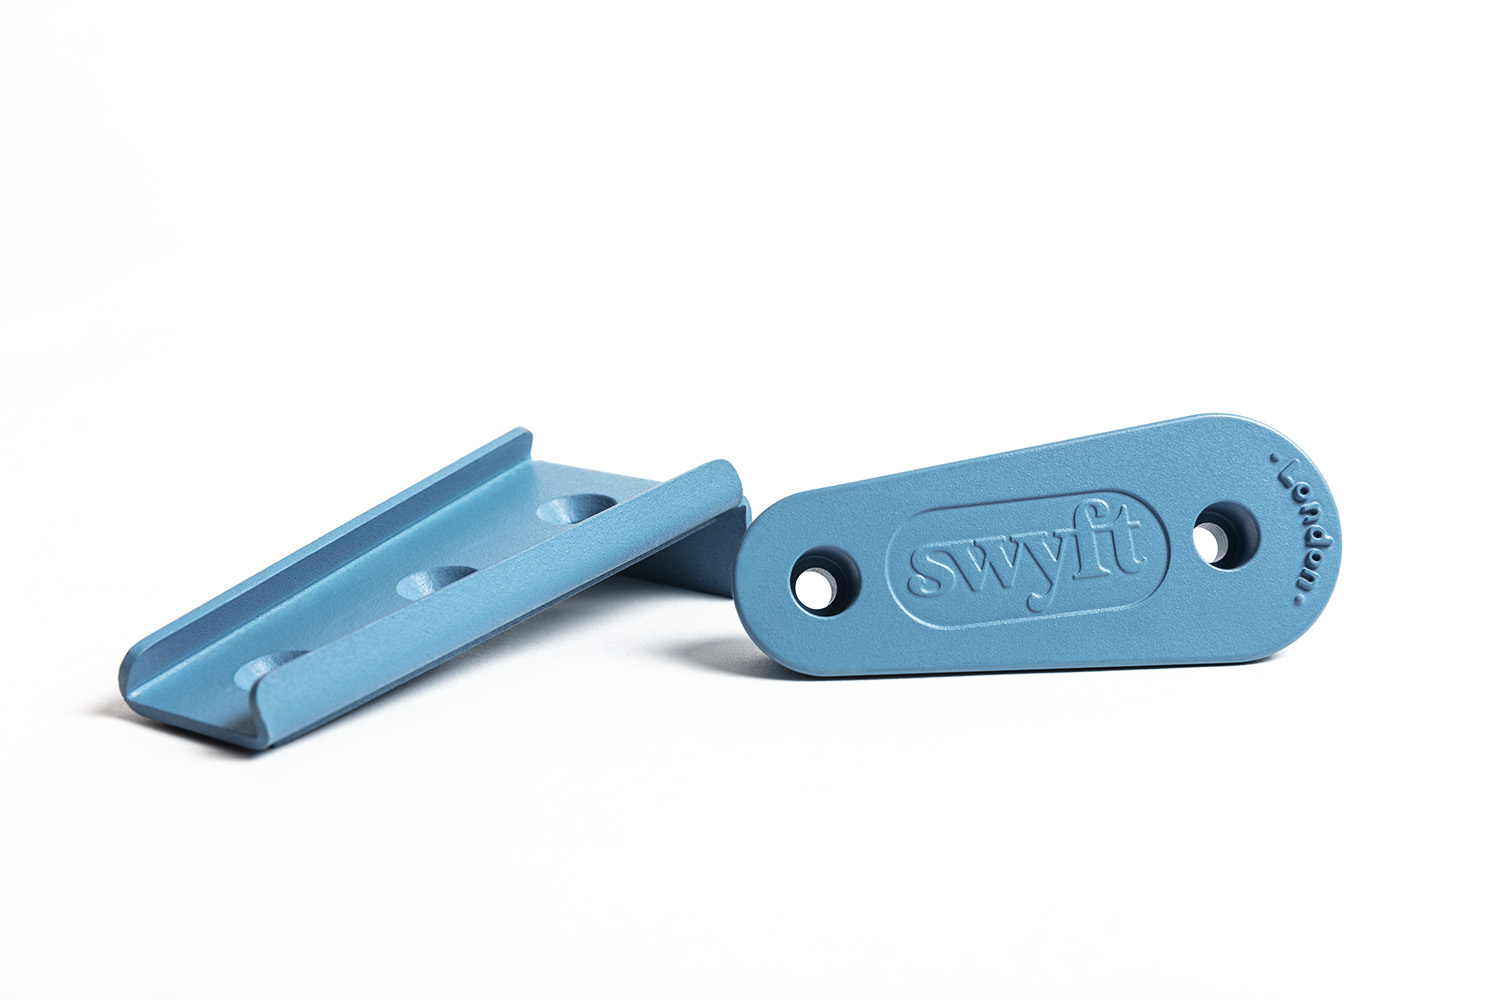 Swyft-lok technology male and female components side angle